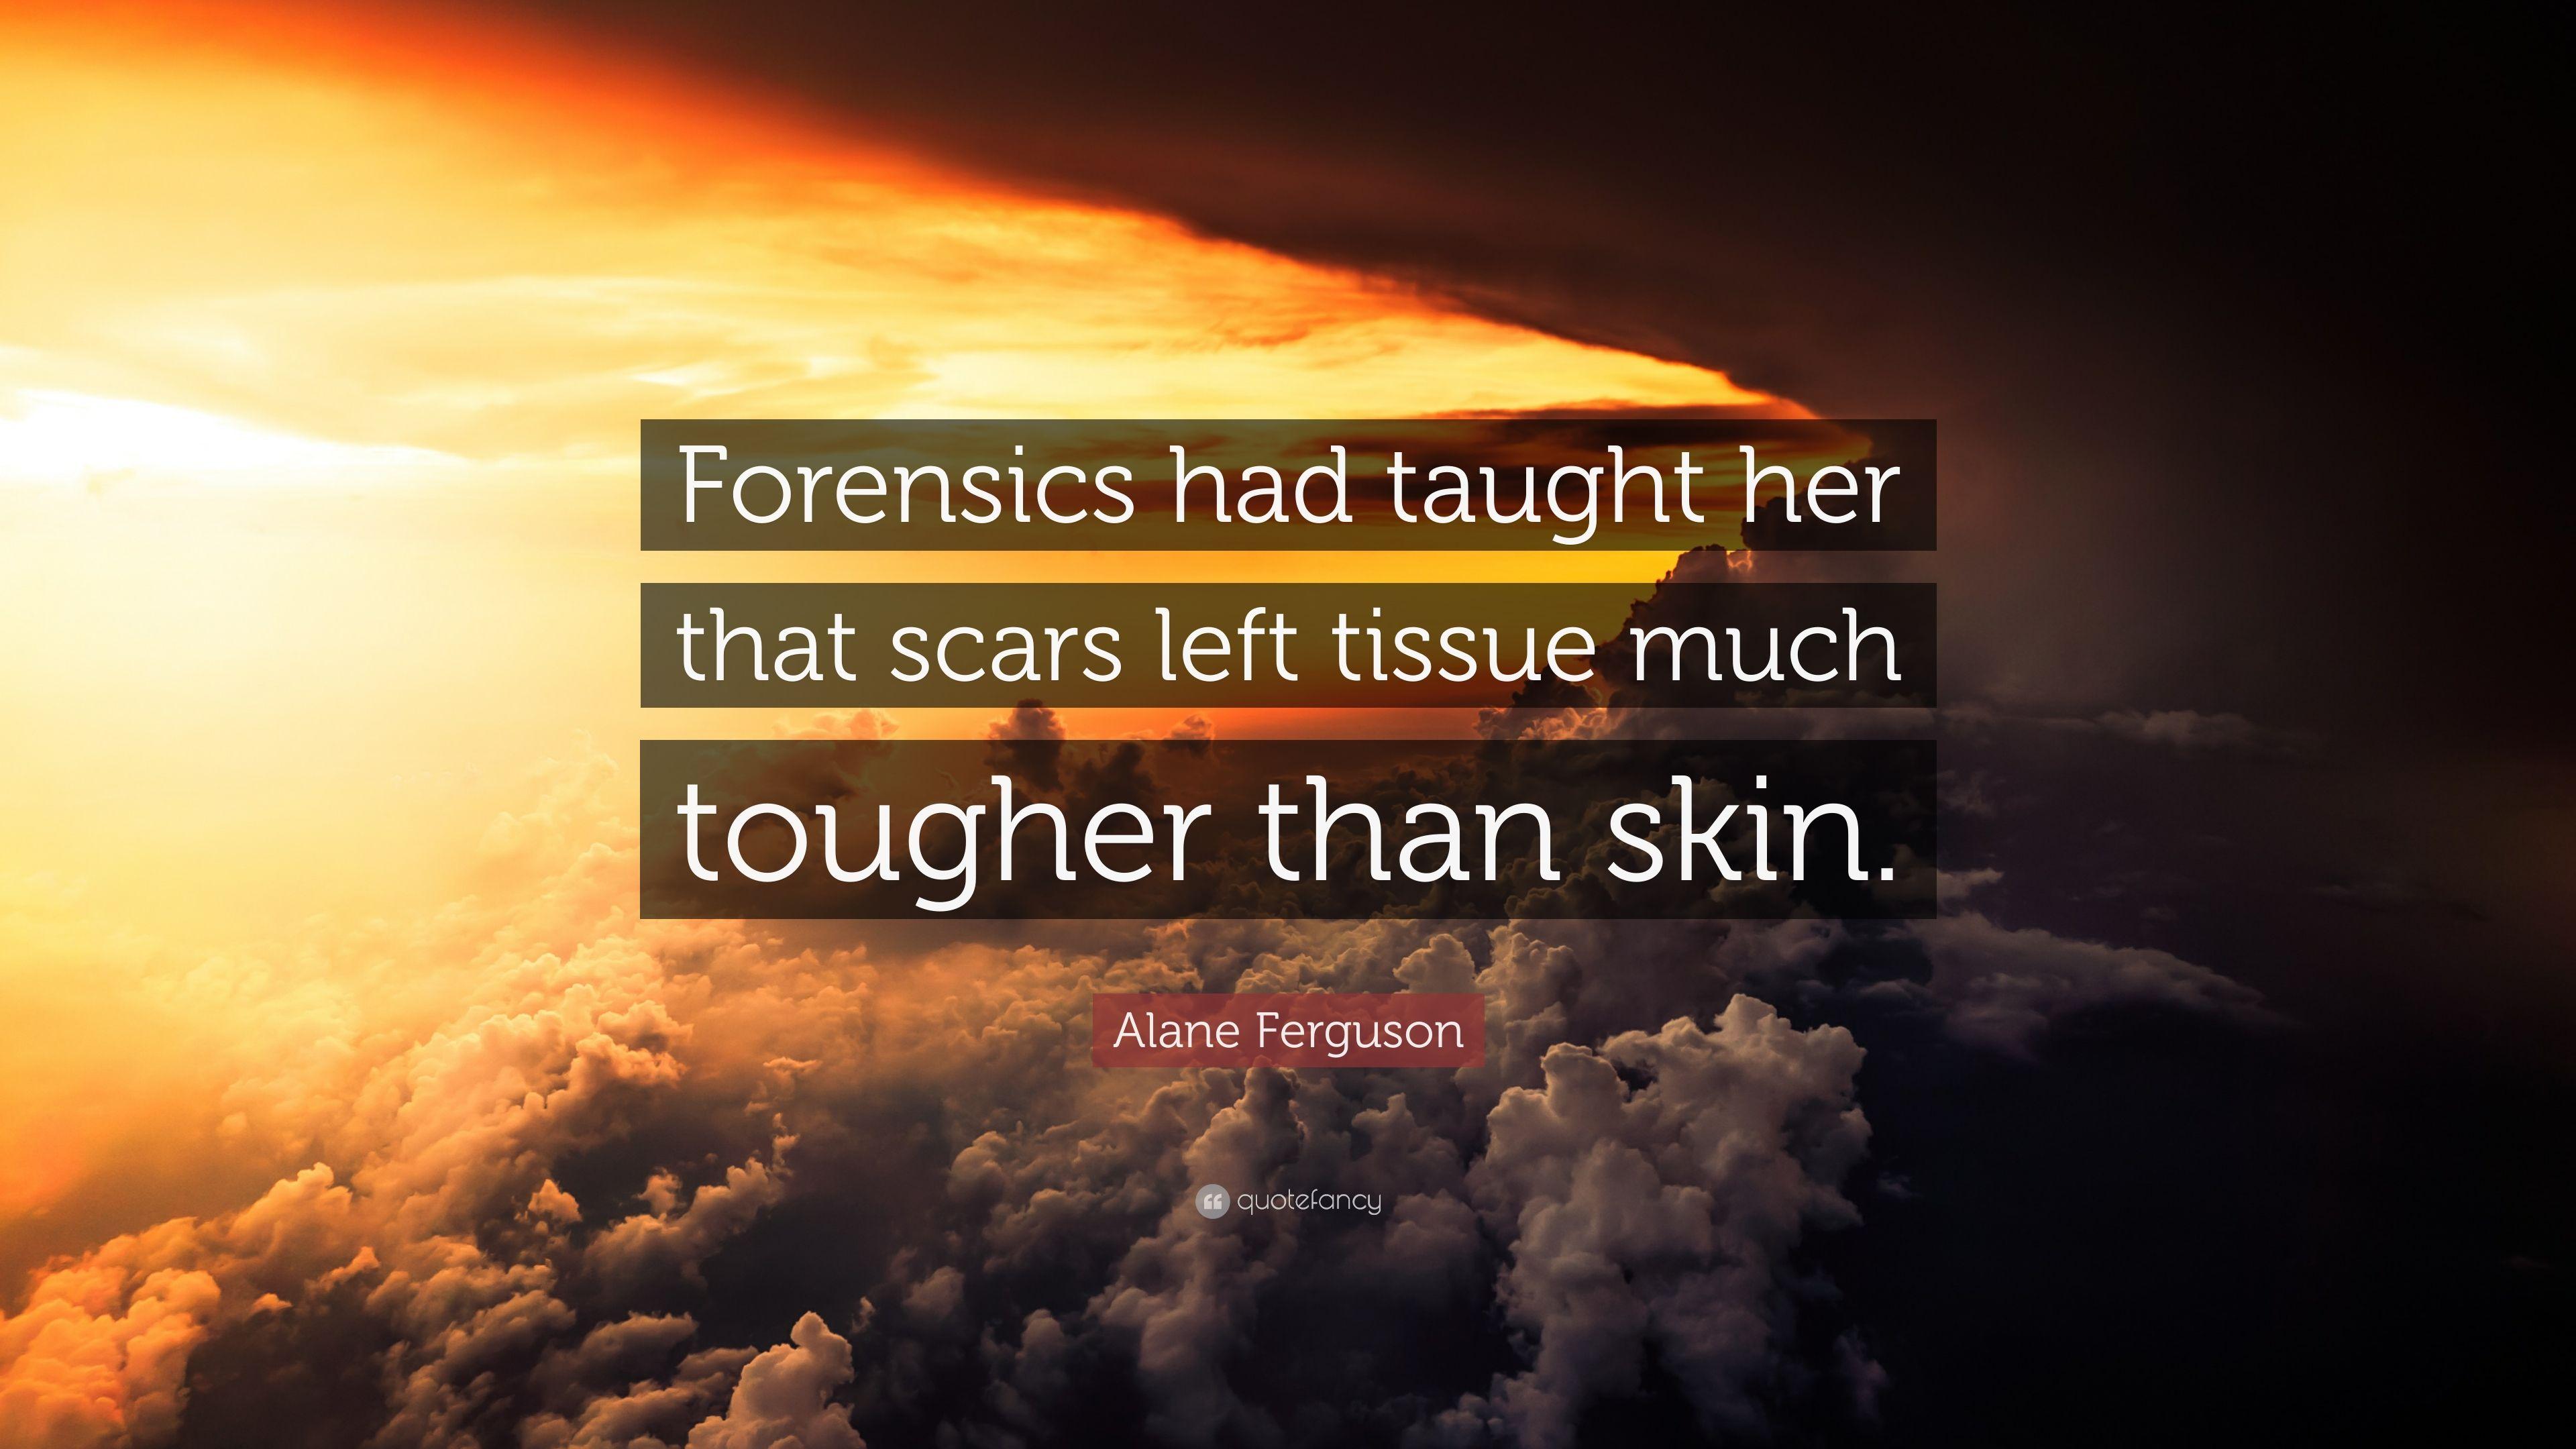 Alane Ferguson Quote: “Forensics had taught her that scars left